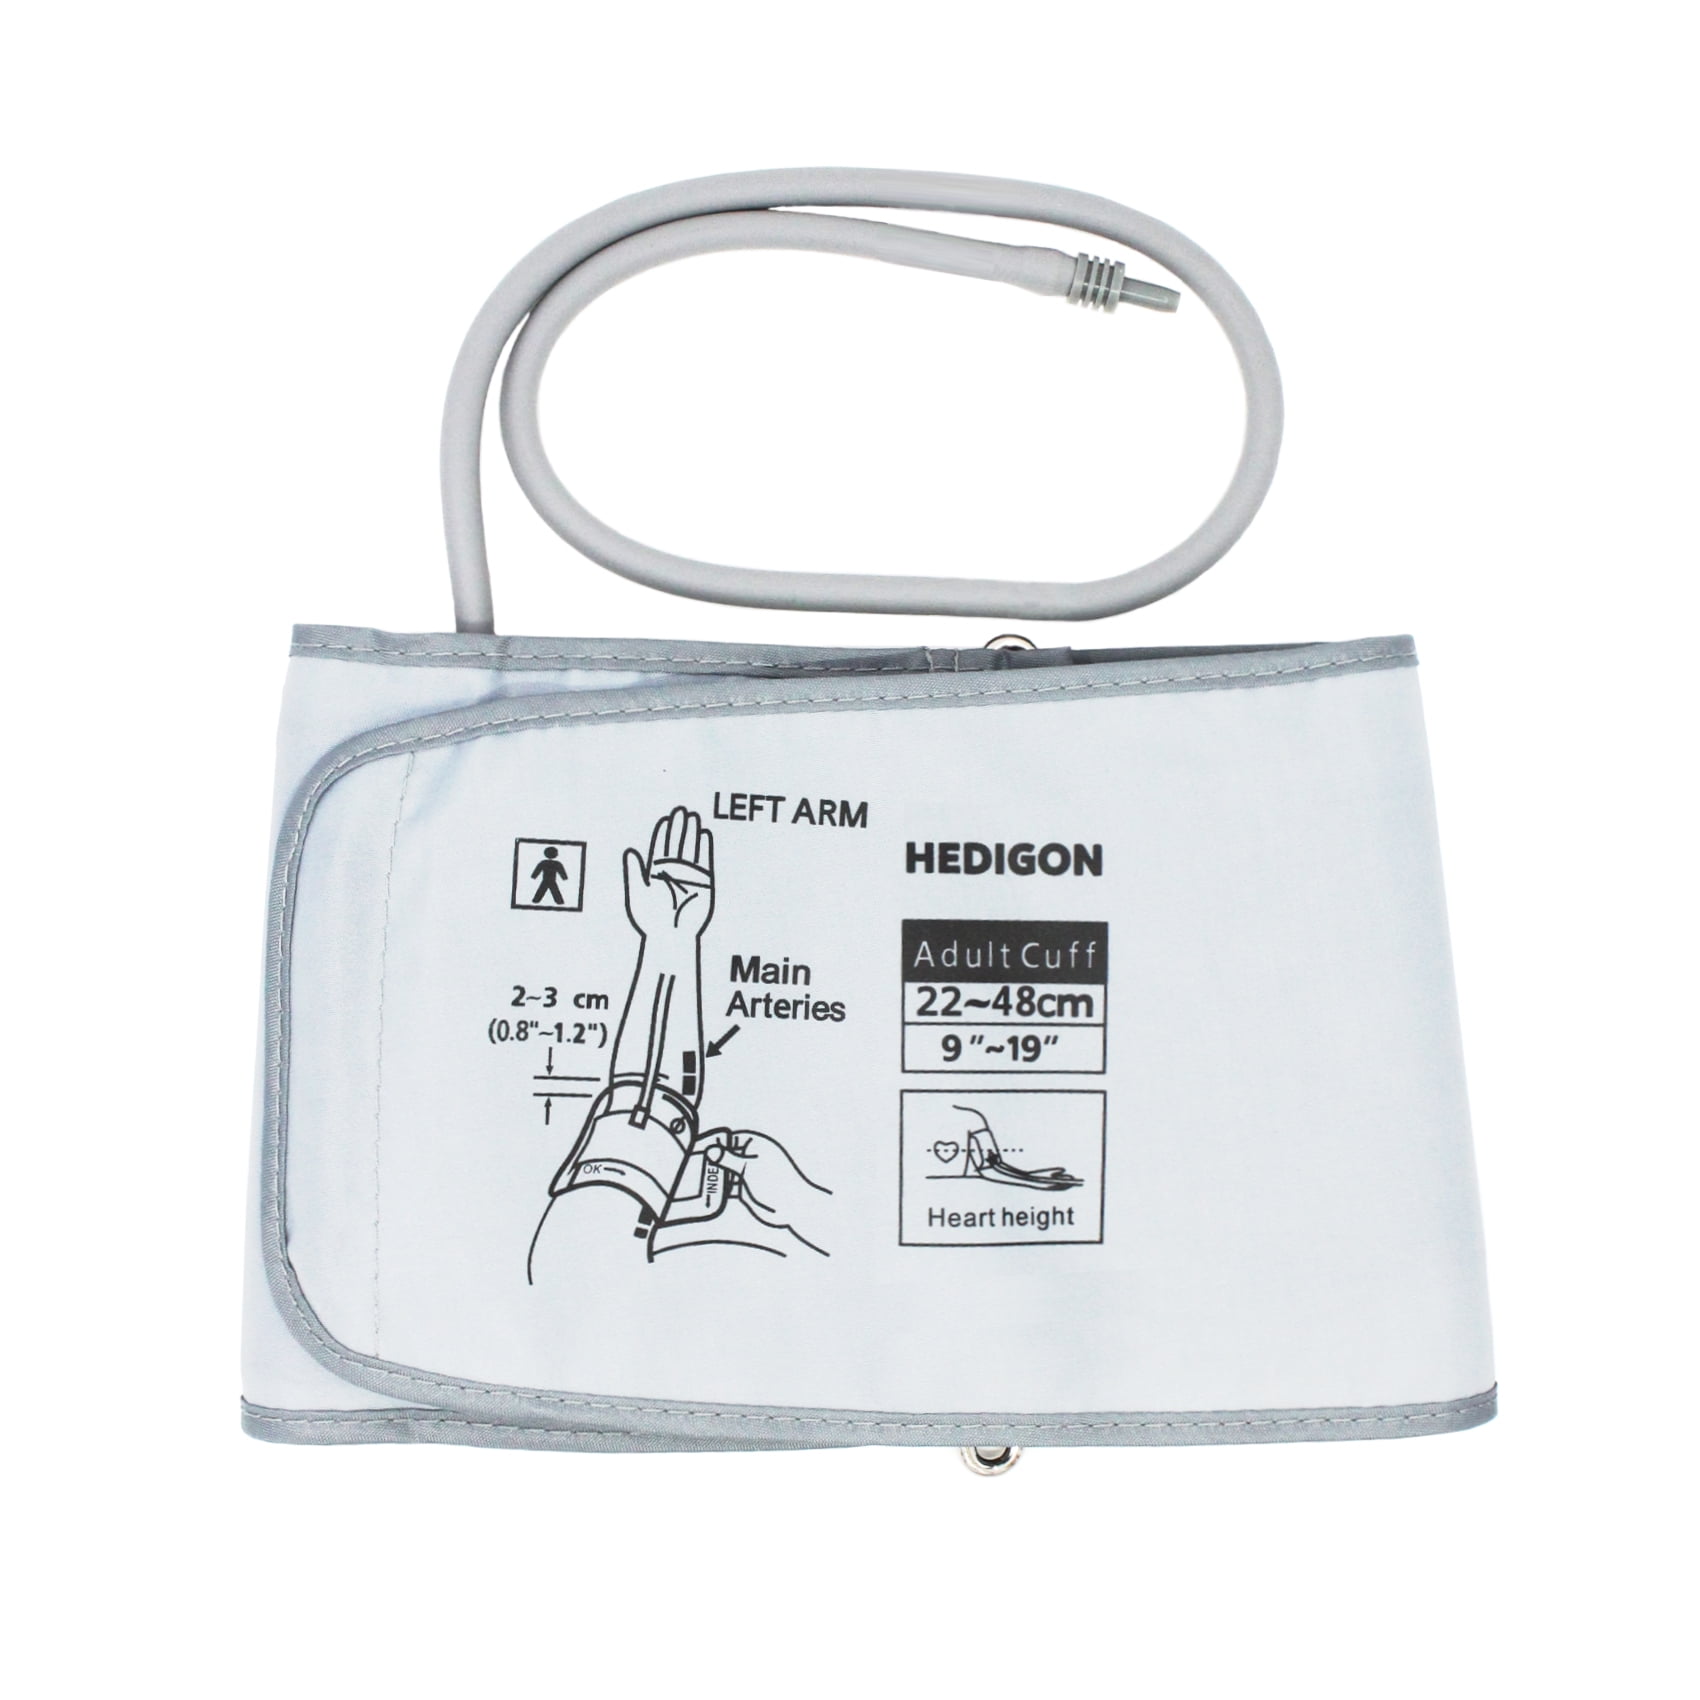 Replacement Cuff For Omron Blood Pressure Monitors, Standard